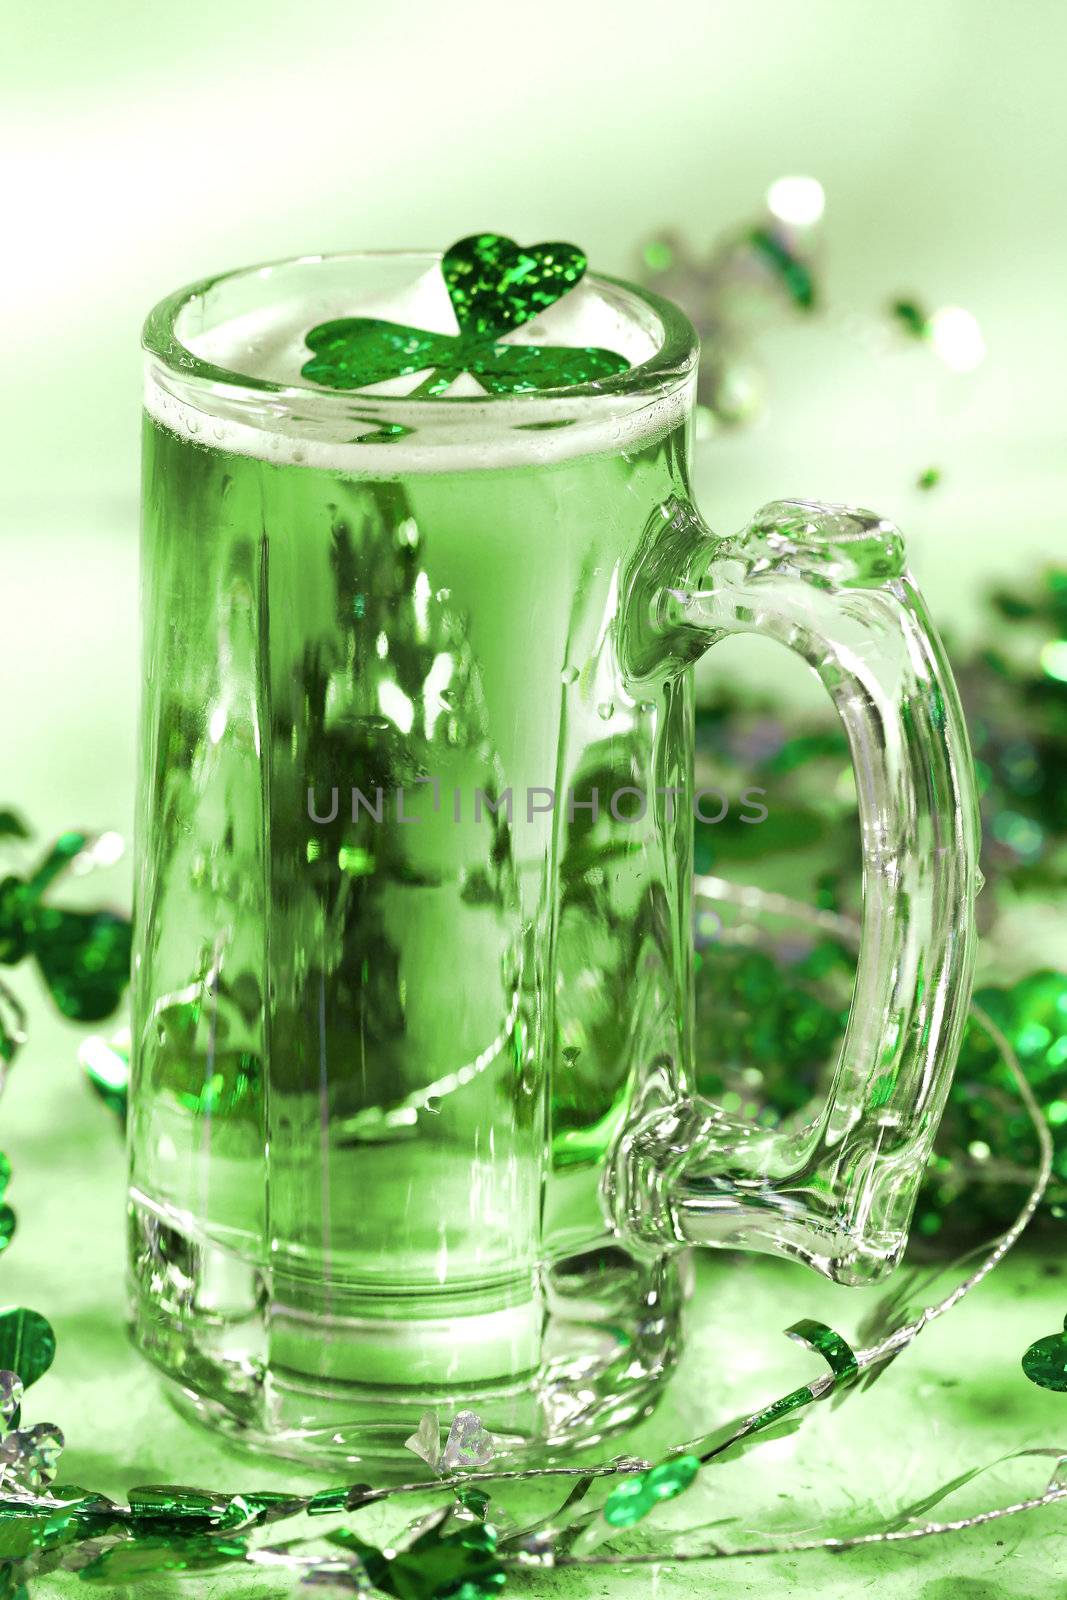 Mug of green beer for St Patick's Day festivities/ Green tone